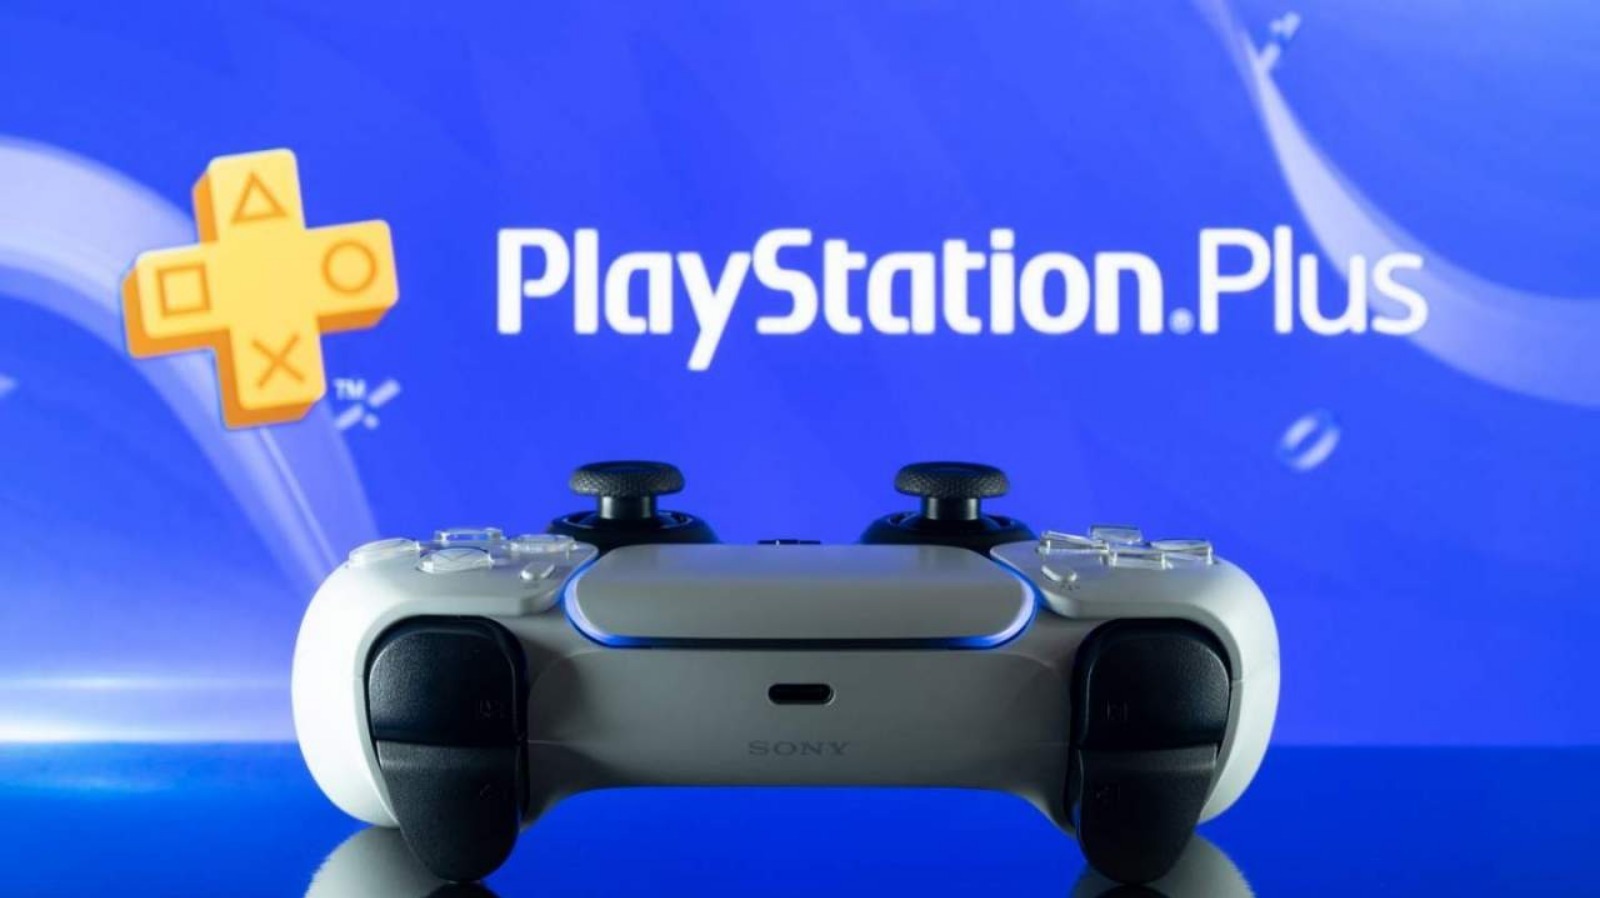 Sony's Playstation Now streaming service now includes PS4 games